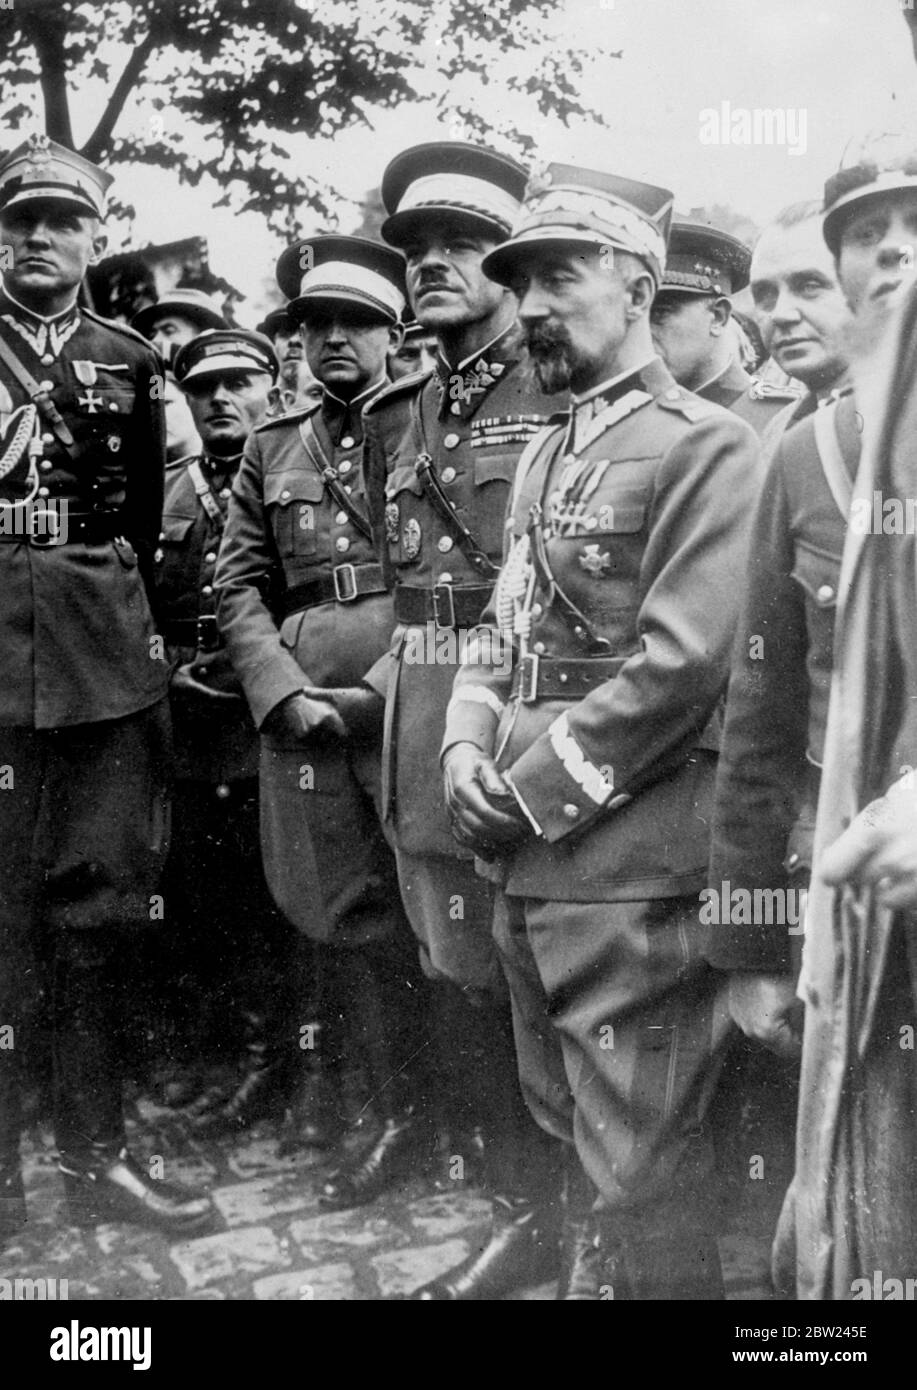 Polish forces are now in occupation of Teschen, the Polish minority district, which was ceded to Poland by Czechoslovakia in compliance with the ultimatum from Poland. The Polish demand came simultaneously with a German diplomatic victory in the Sudetenland disputes. Photo shows: General Malinowski of the Polish army, right, with General Hrabozik of Czechoslovakia and Lieutenant Colonel Szincel, as Polish forces took over. October 1938 Stock Photo